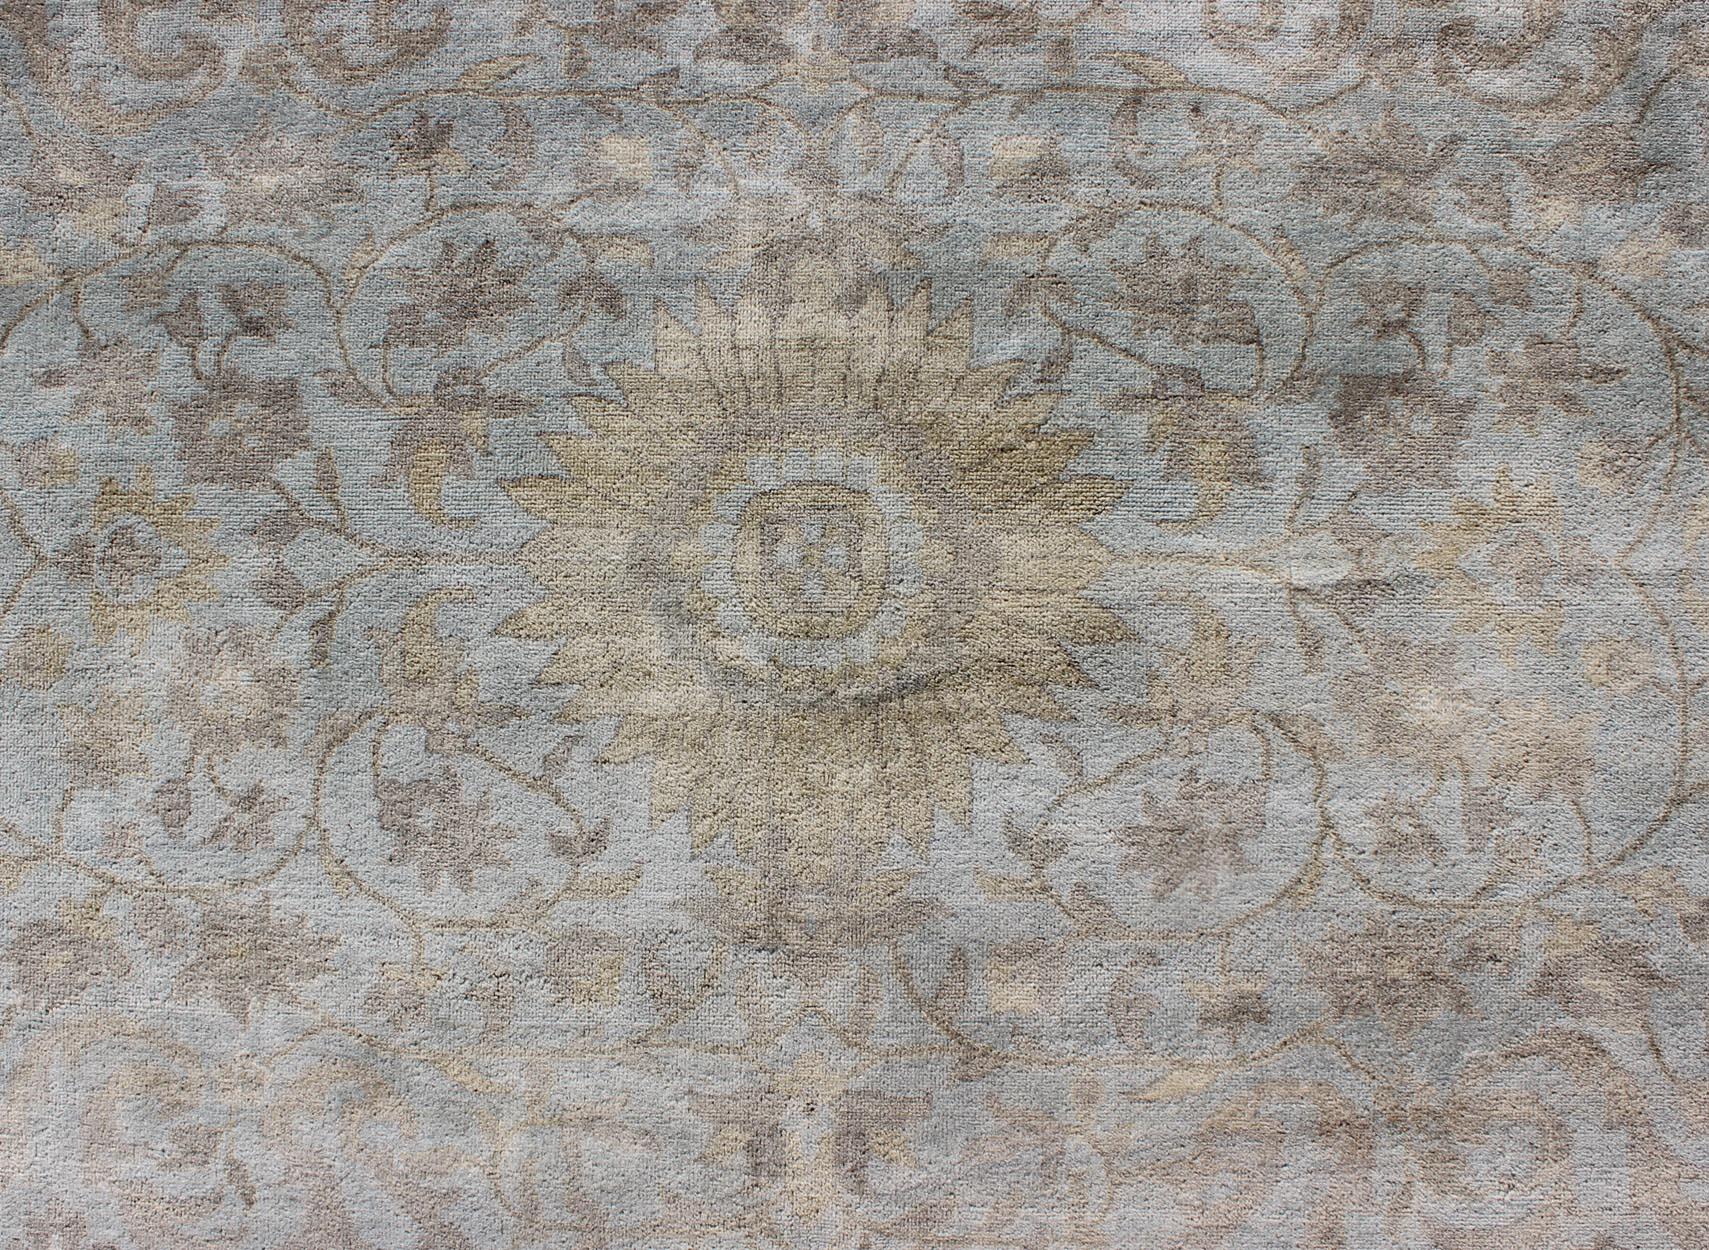 Contemporary Large Floral Tabriz with Floral Design in Lt. Blue, Brown, Lt. Yellow, Taupe For Sale